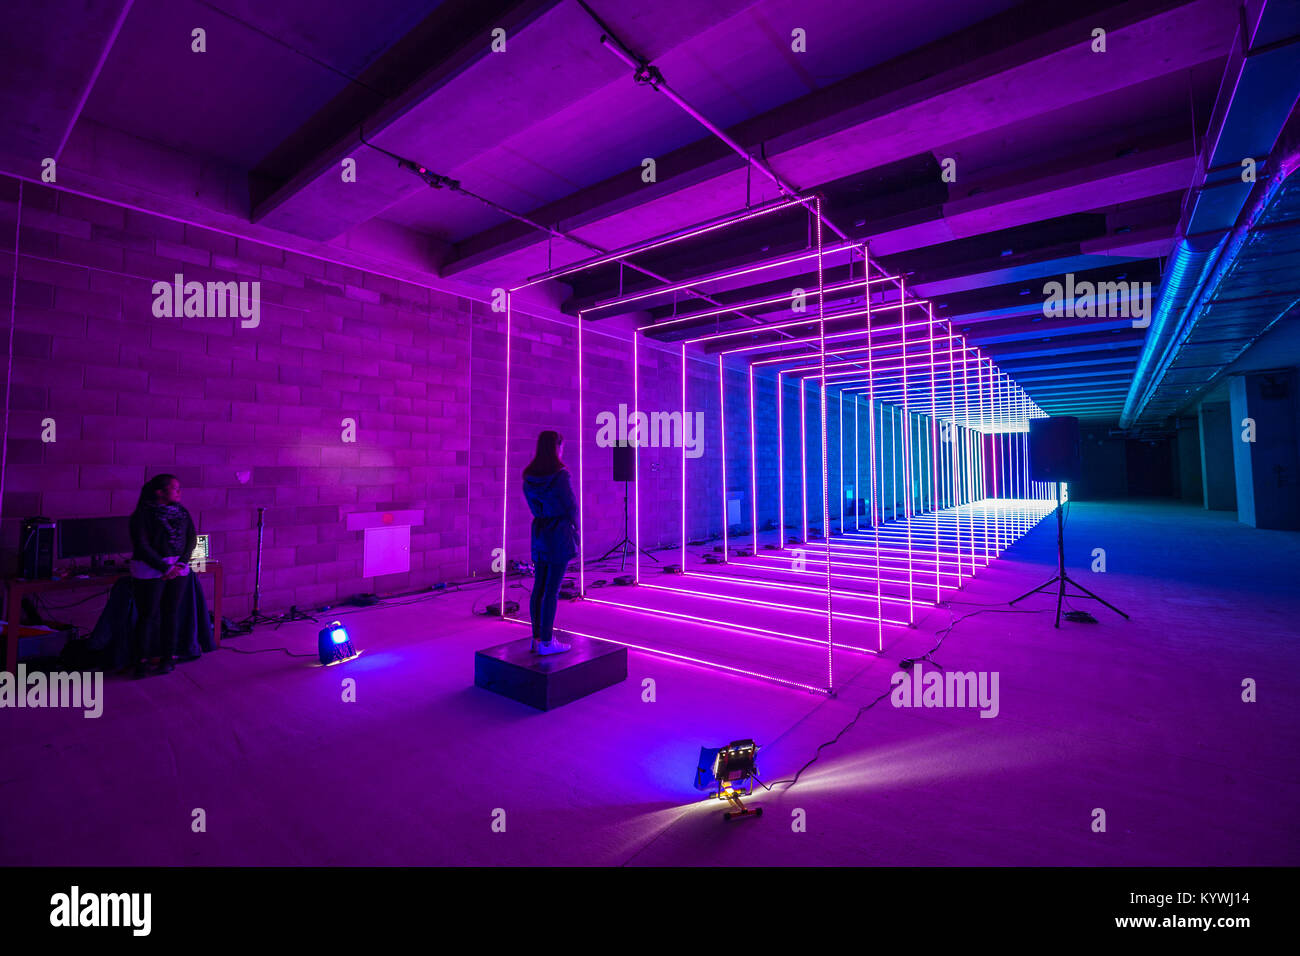 London, UK. 16th Jan, 2018. Winter Lights interactive art installations at Canary Wharf includes Marcus Lyall's ‘On Your Wavelength' a mind-powered laser and sound installation of over 20,000 LEDs. Lyall's structure uses participant's brain activity to choreograph beautiful light patterns. Credit: Guy Corbishley/Alamy Live News Stock Photo